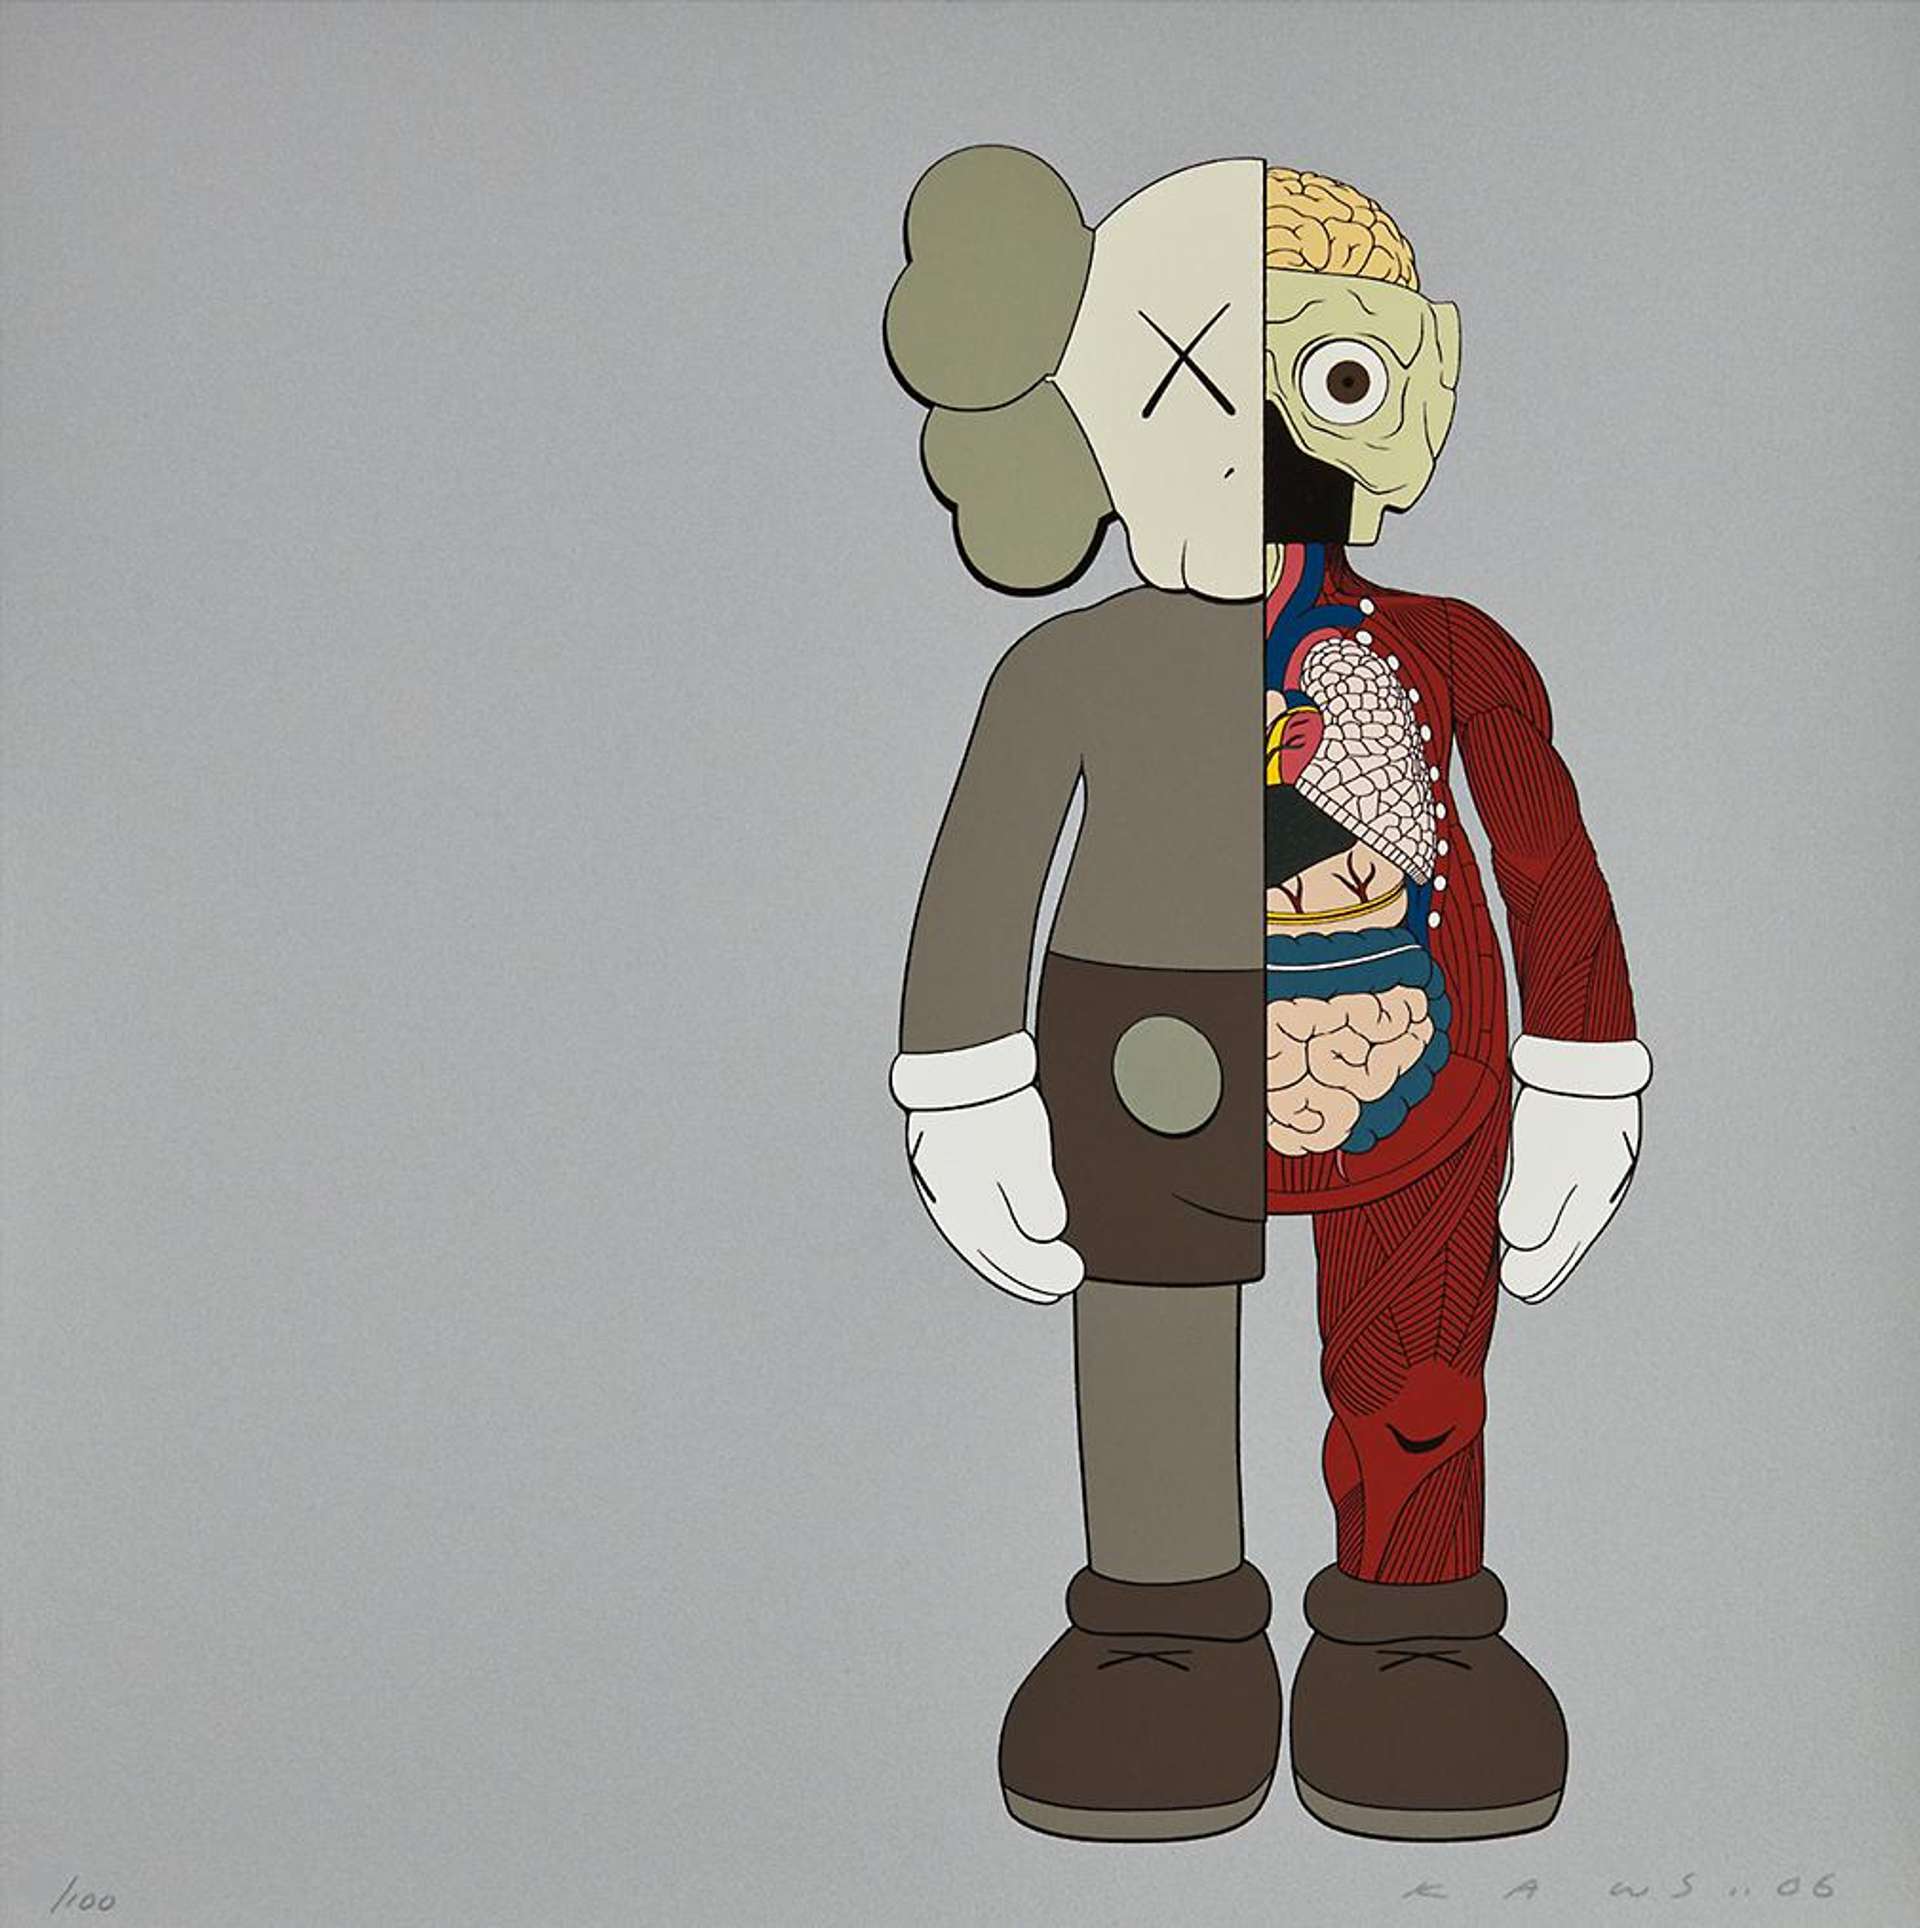 Where to Buy Authentic Kaws Artwork?, We Sell Awesome Art